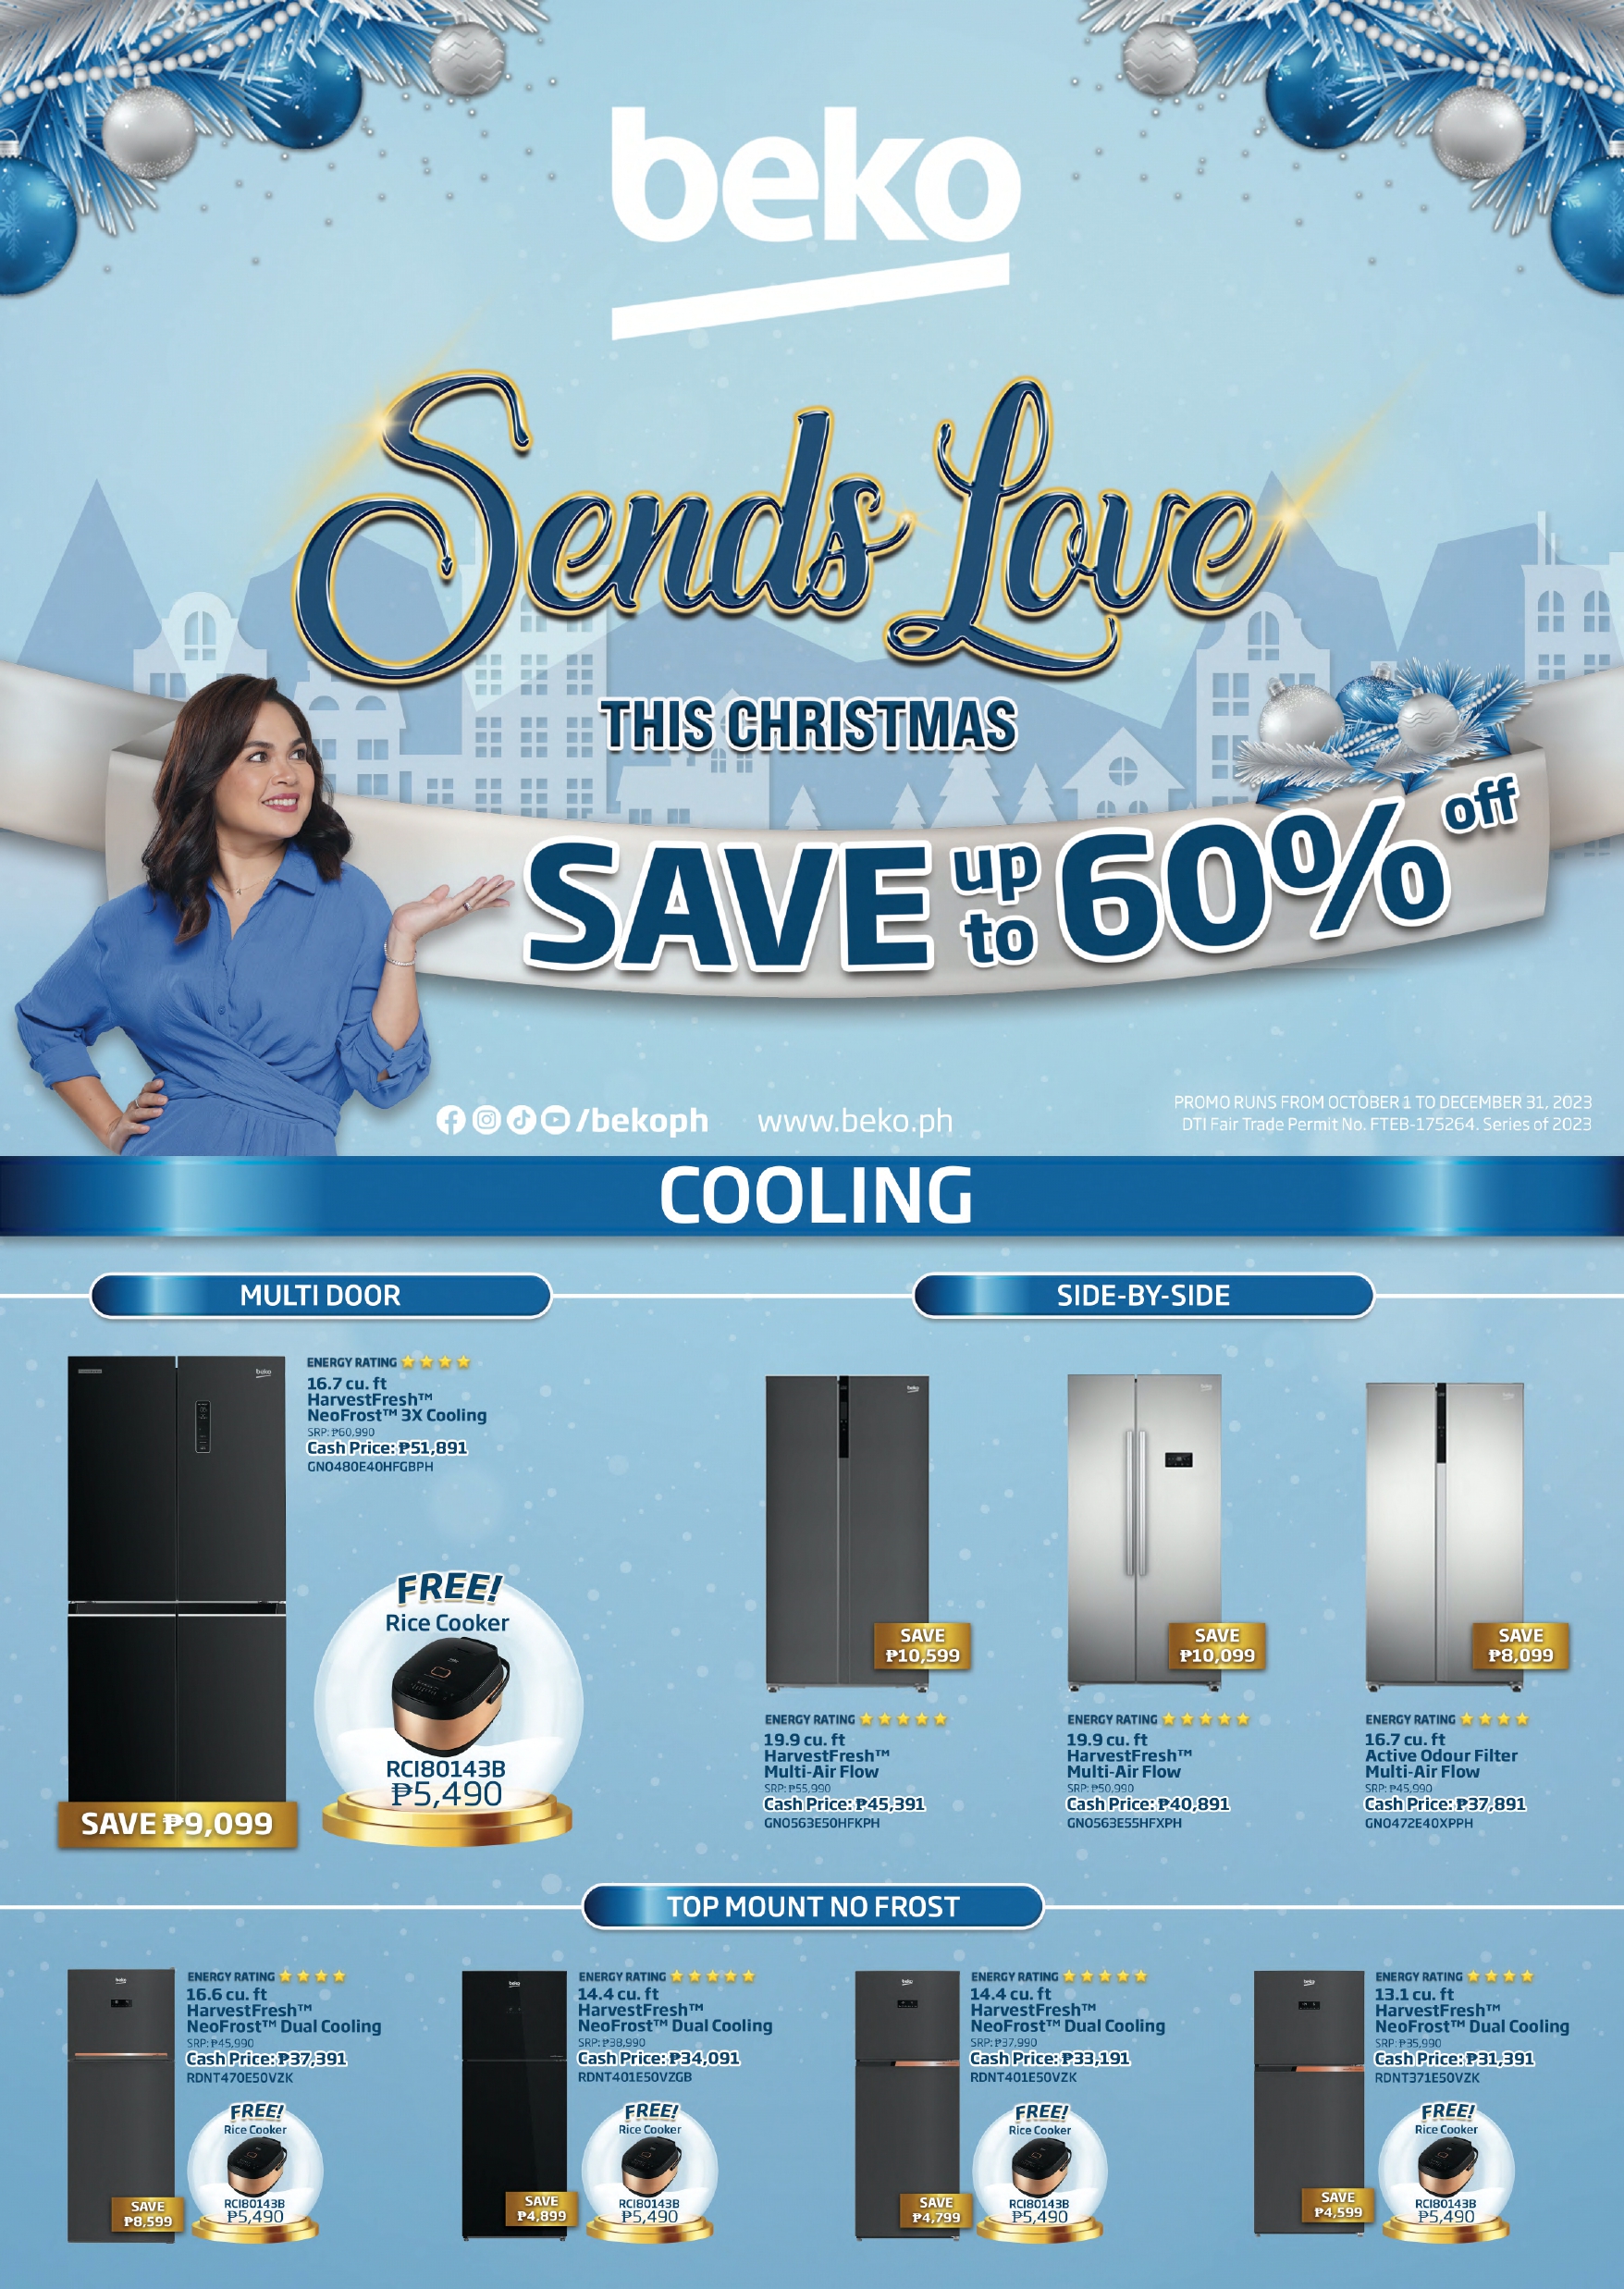 Beko Sends Love 2023 promo gives you up to 60% savings and freebies on selected appliances